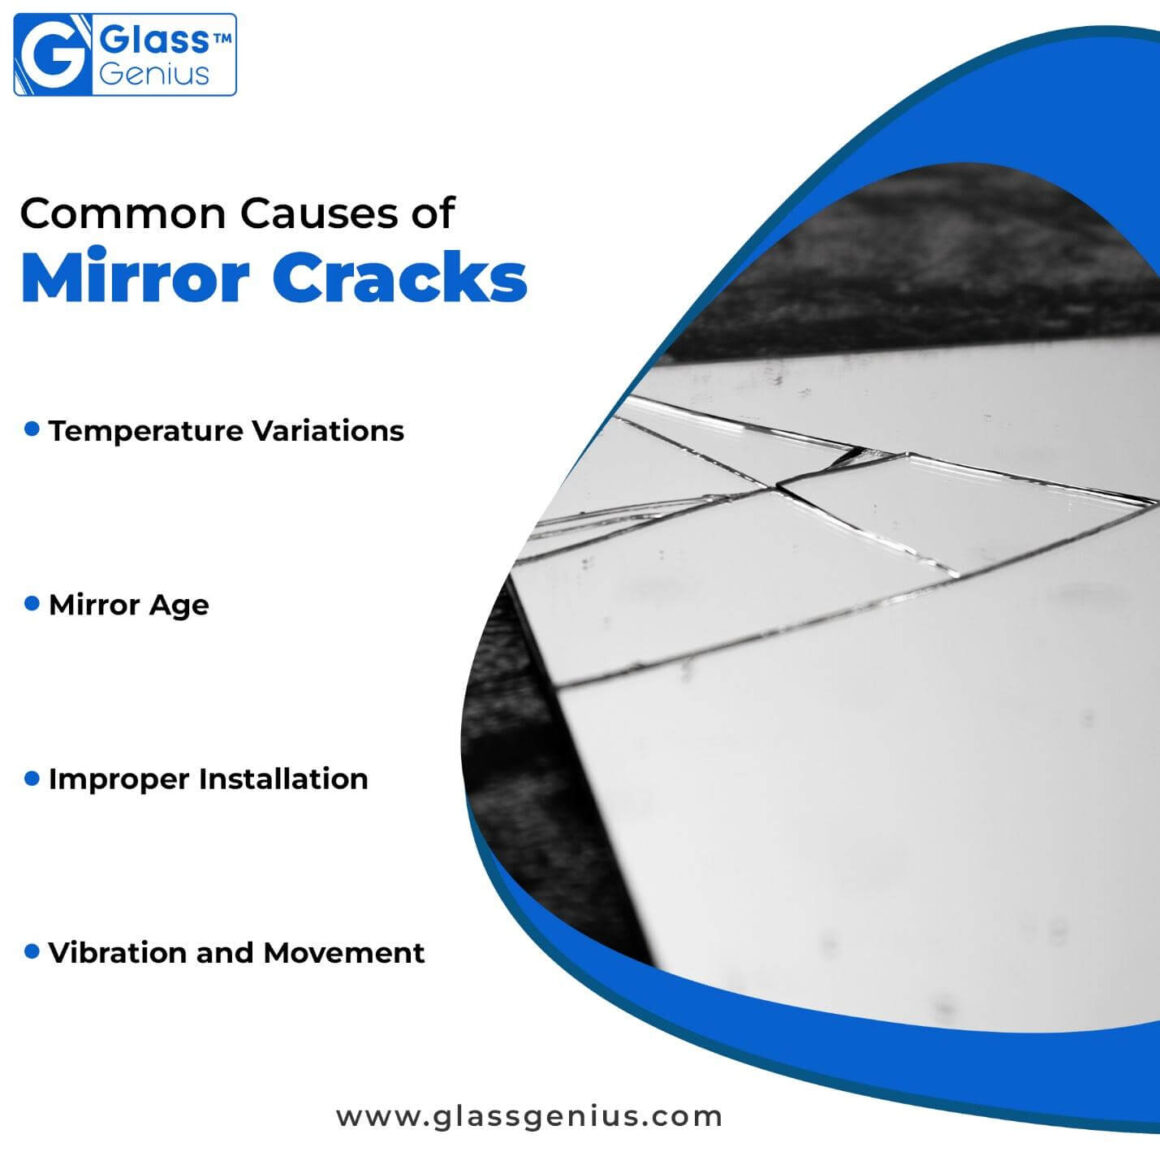 How to Fix a Cracked Mirror? Various DIY Methods Explained!